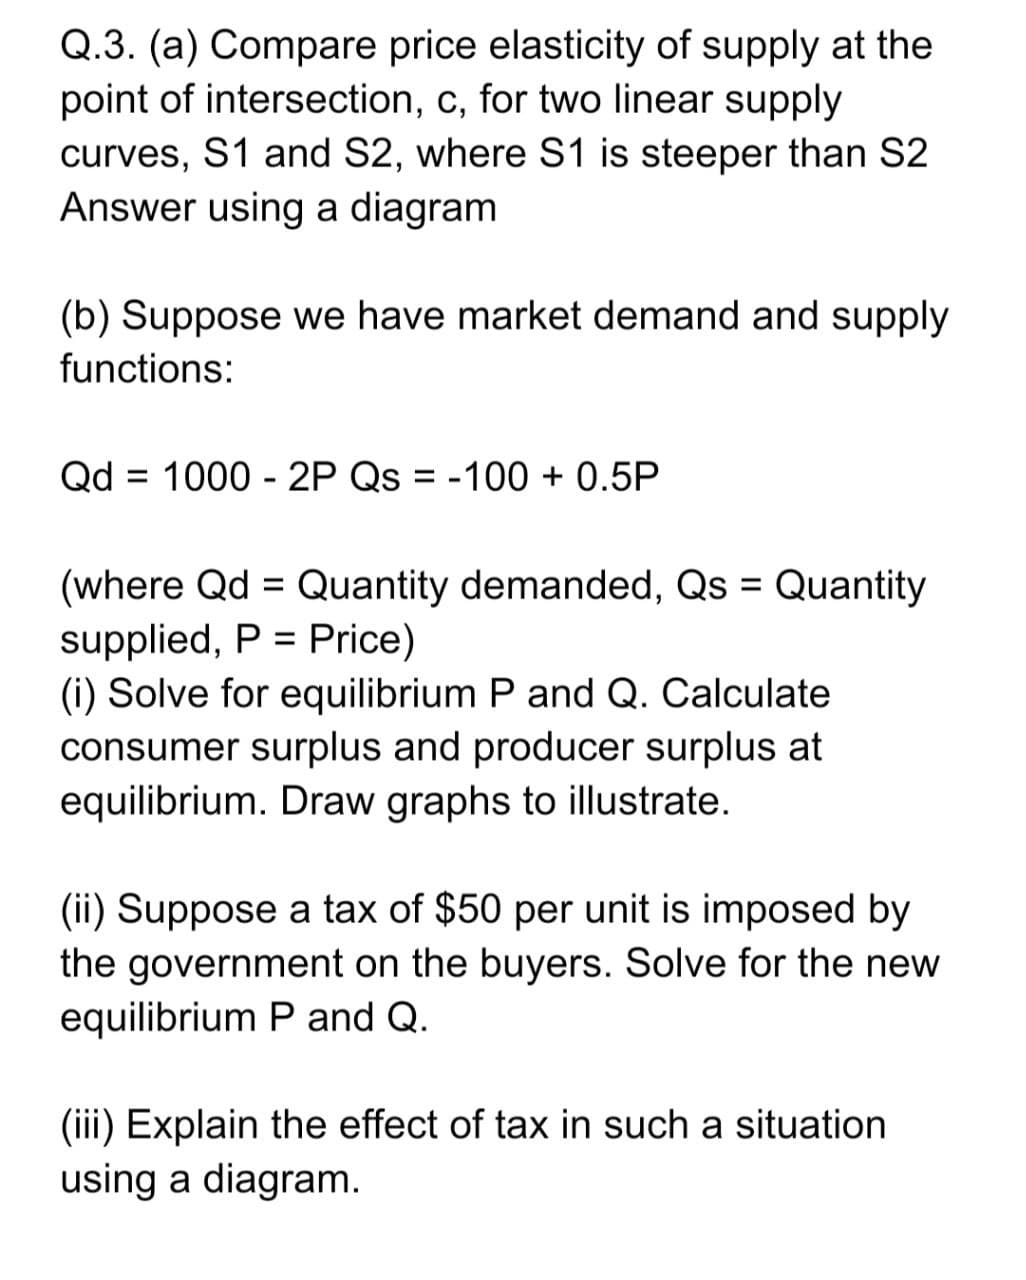 Q.3. (a) Compare price elasticity of supply at the
point of intersection, c, for two linear supply
curves, S1 and S2, where S1 is steeper than S2
Answer using a diagram
(b) Suppose we have market demand and supply
functions:
Qd = 1000 - 2P Qs = -100 + 0.5P
(where Qd = Quantity demanded, Qs = Quantity
supplied, P = Price)
(i) Solve for equilibrium P and Q. Calculate
consumer surplus and producer surplus at
equilibrium. Draw graphs to illustrate.
(ii) Suppose a tax of $50 per unit is imposed by
the government on the buyers. Solve for the new
equilibrium P and Q.
(iii) Explain the effect of tax in such a situation
using a diagram.
